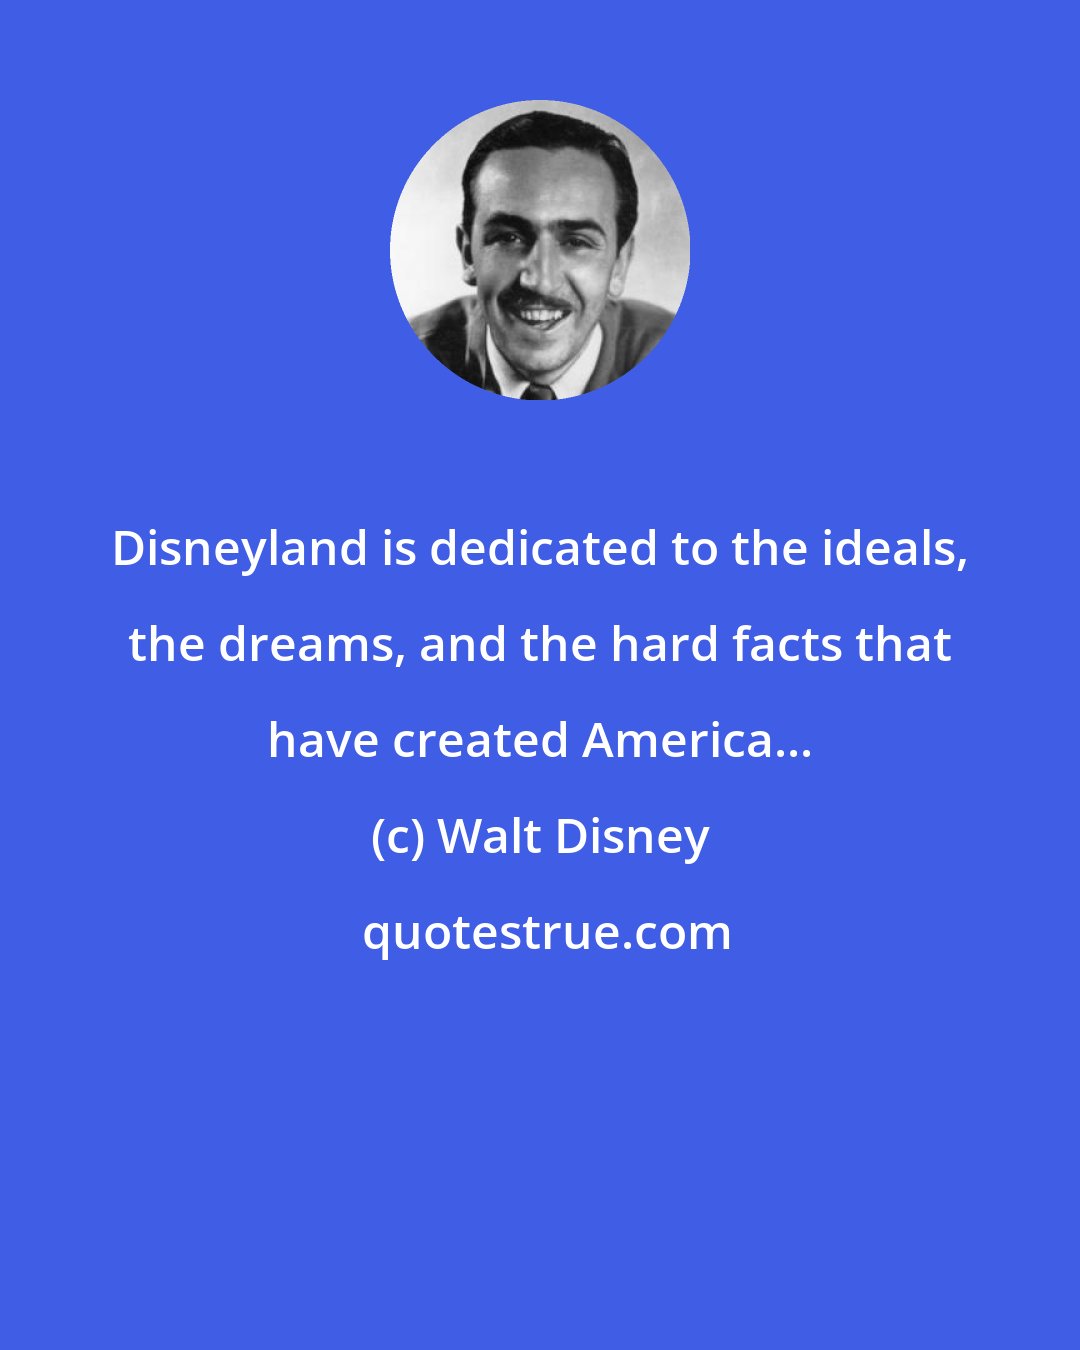 Walt Disney: Disneyland is dedicated to the ideals, the dreams, and the hard facts that have created America...